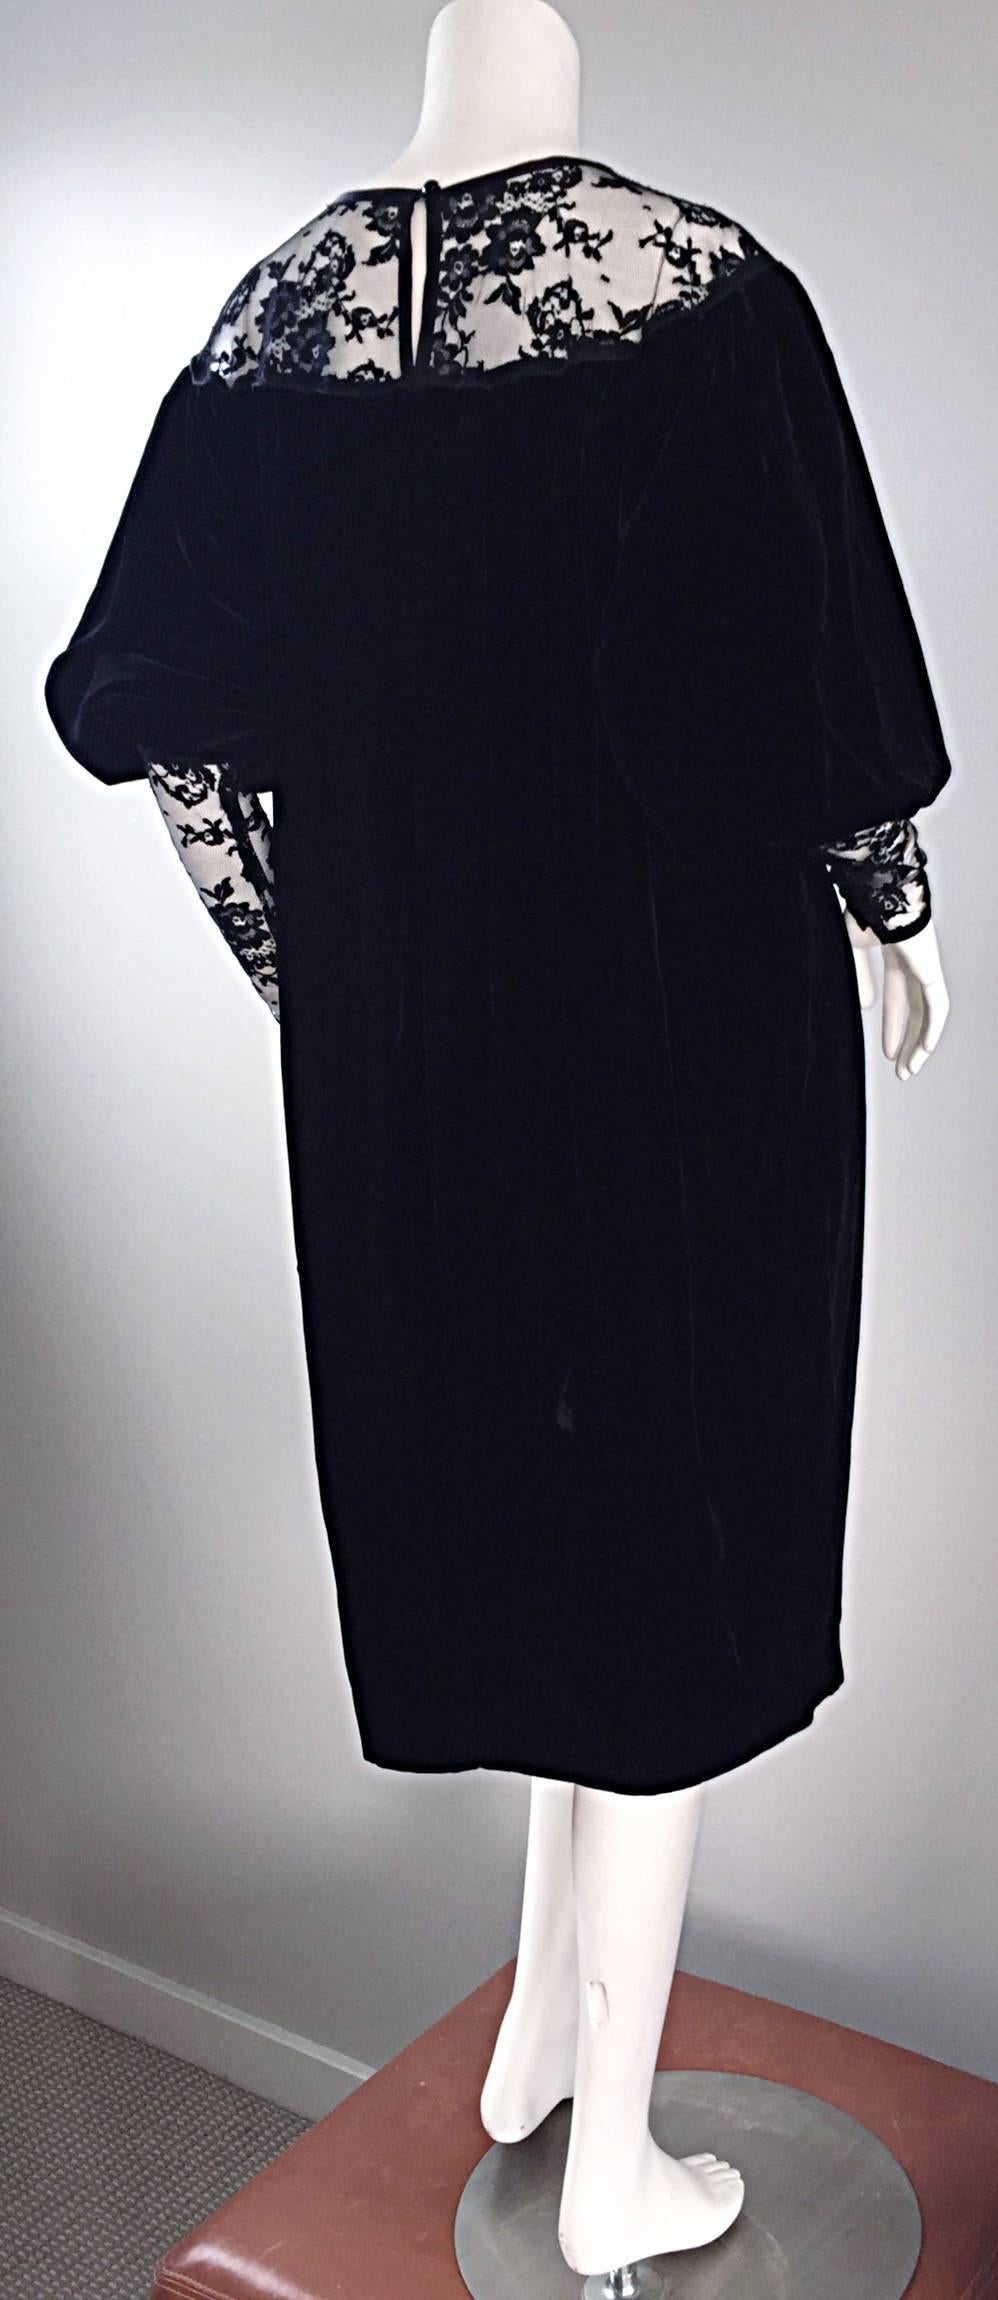 Important documented YSL 'Rive Gauche' black silk velvet balloon style bubble Babydoll dress! Documented in the main Yves Saint Laurent ad campaign in 1981 (see photos of same dress in different color). Luscious black silk velvet, with black silk